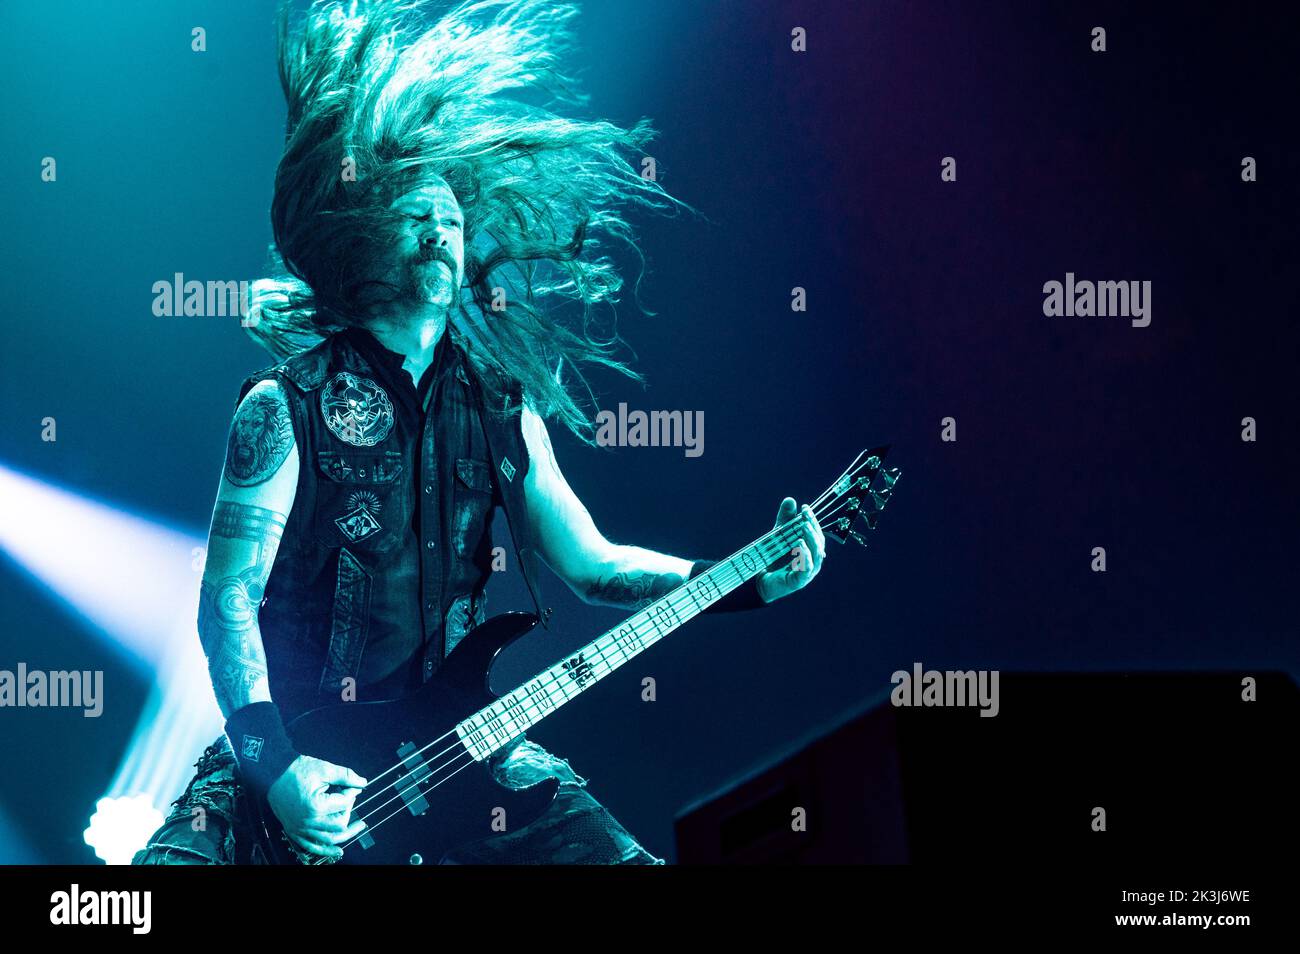 Copenhagen, Denmark. 26th Sep, 2022. The American heavy metal band Machine Head performs a live concert at Forum Black Box in Frederiksberg, Copenhagen. Here bass player Jared MacEachern is seen live on stage. (Photo Credit: Gonzales Photo/Alamy Live News Stock Photo